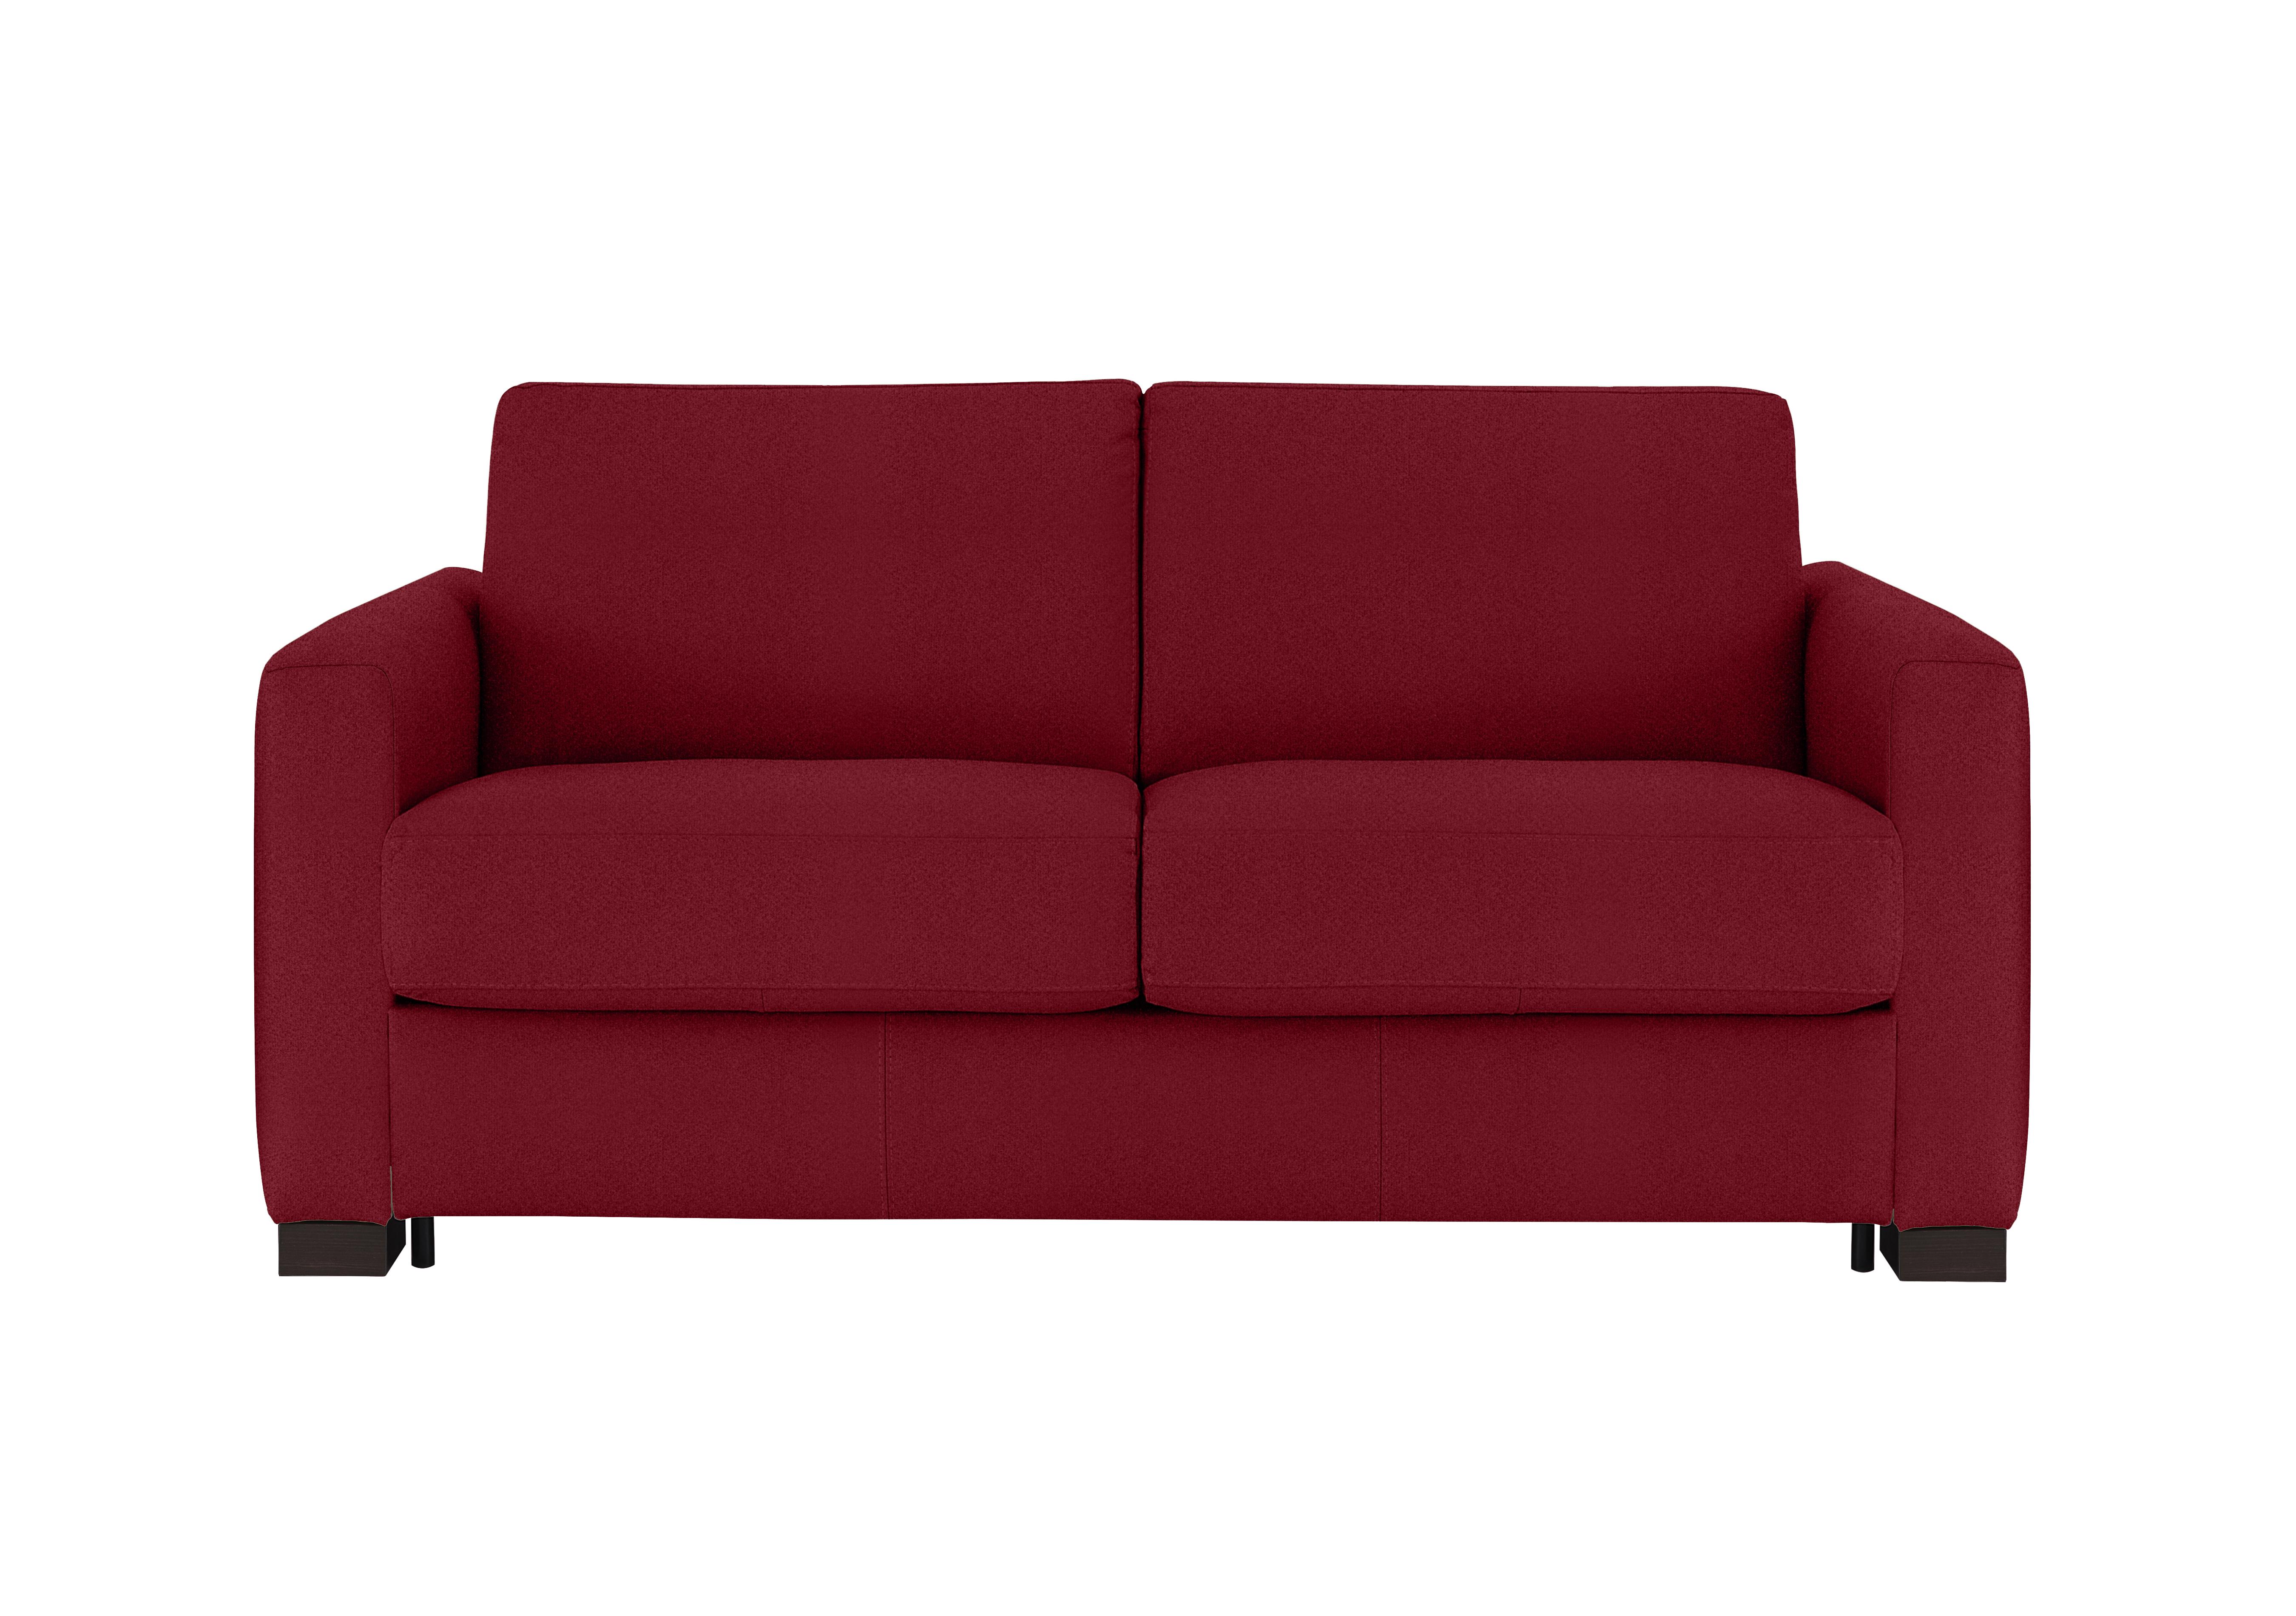 Alcova 2 Seater Fabric Sofa Bed with Box Arms in Coupe Rosso 305 on Furniture Village